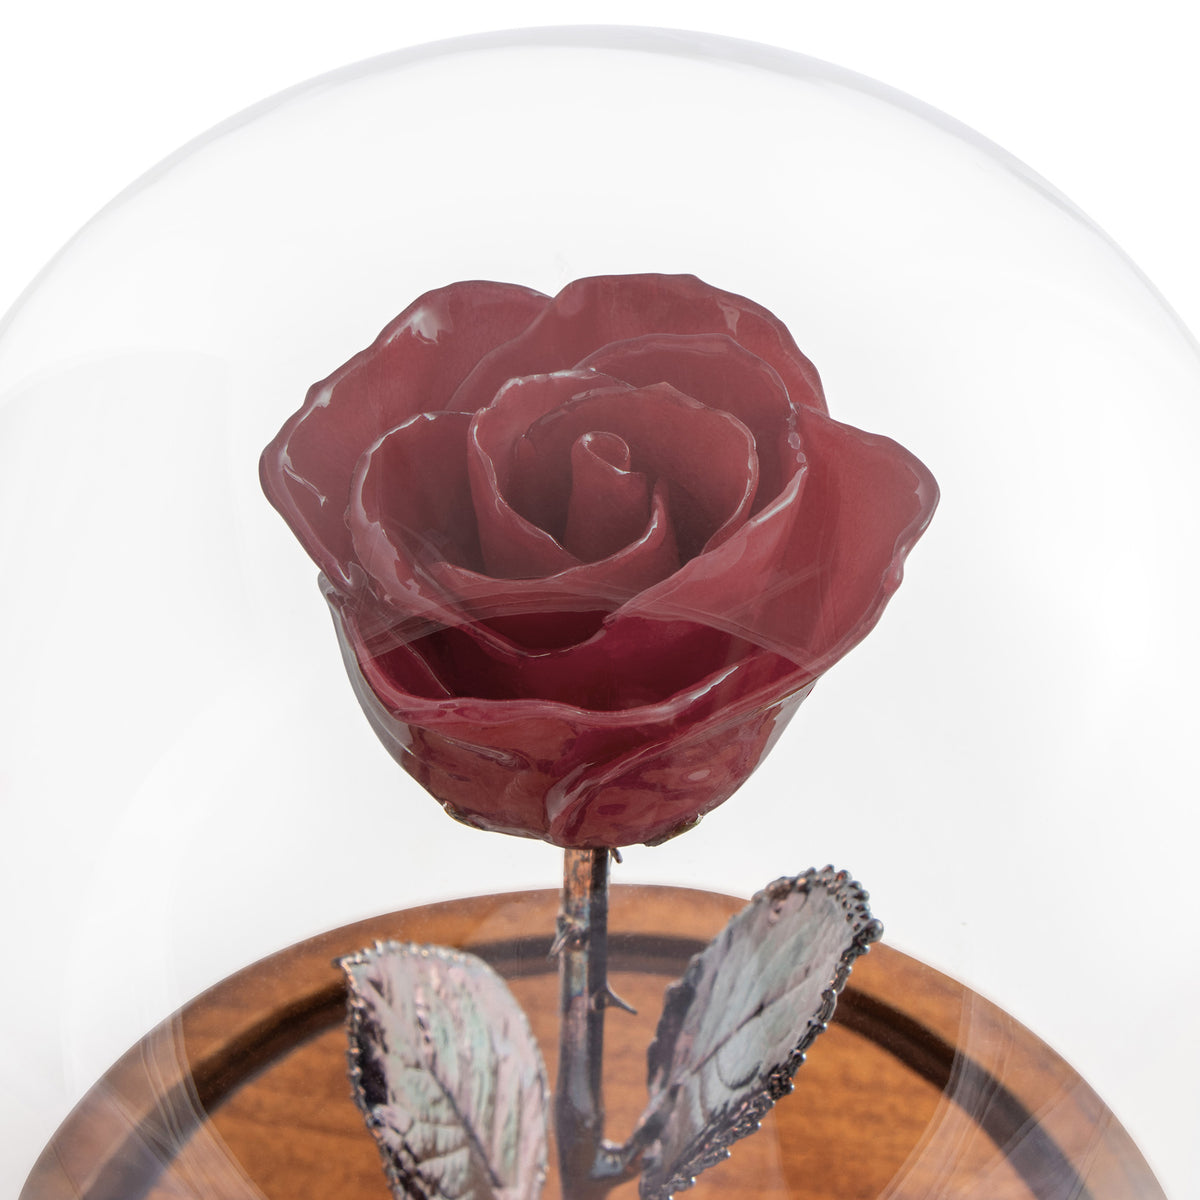 Burgundy Enchanted Rose (aka Beauty &amp; The Beast Rose) with Patina Copper Stem Mounted to A Hand Turned Solid Wood Base under a glass dome.